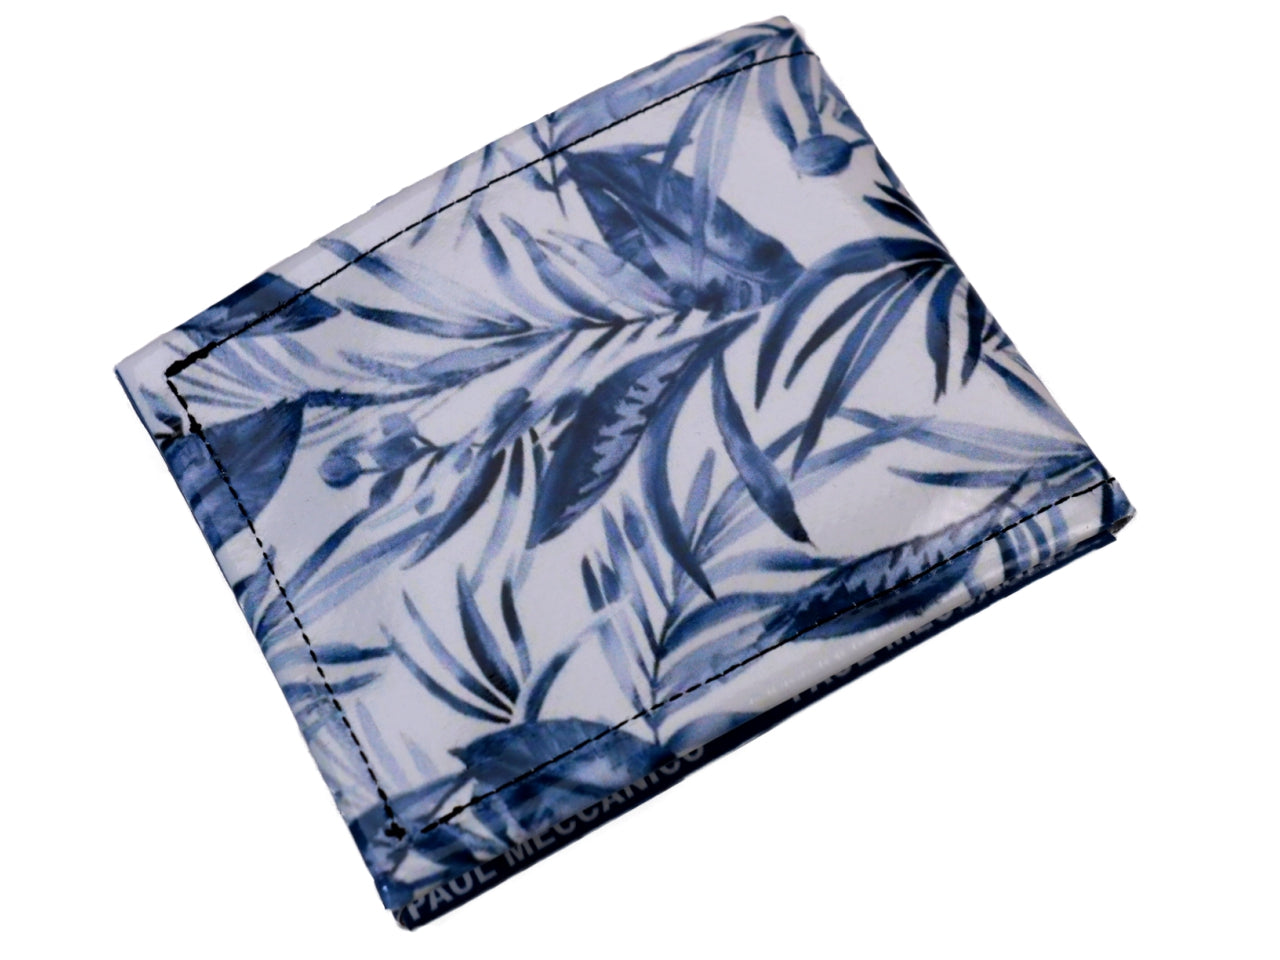 MEN'S WALLET BLUE AND WHITE WITH FLORAL FANTASY. MODEL CRIK MADE OF LORRY TARPAULIN. - Limited Edition Paul Meccanico